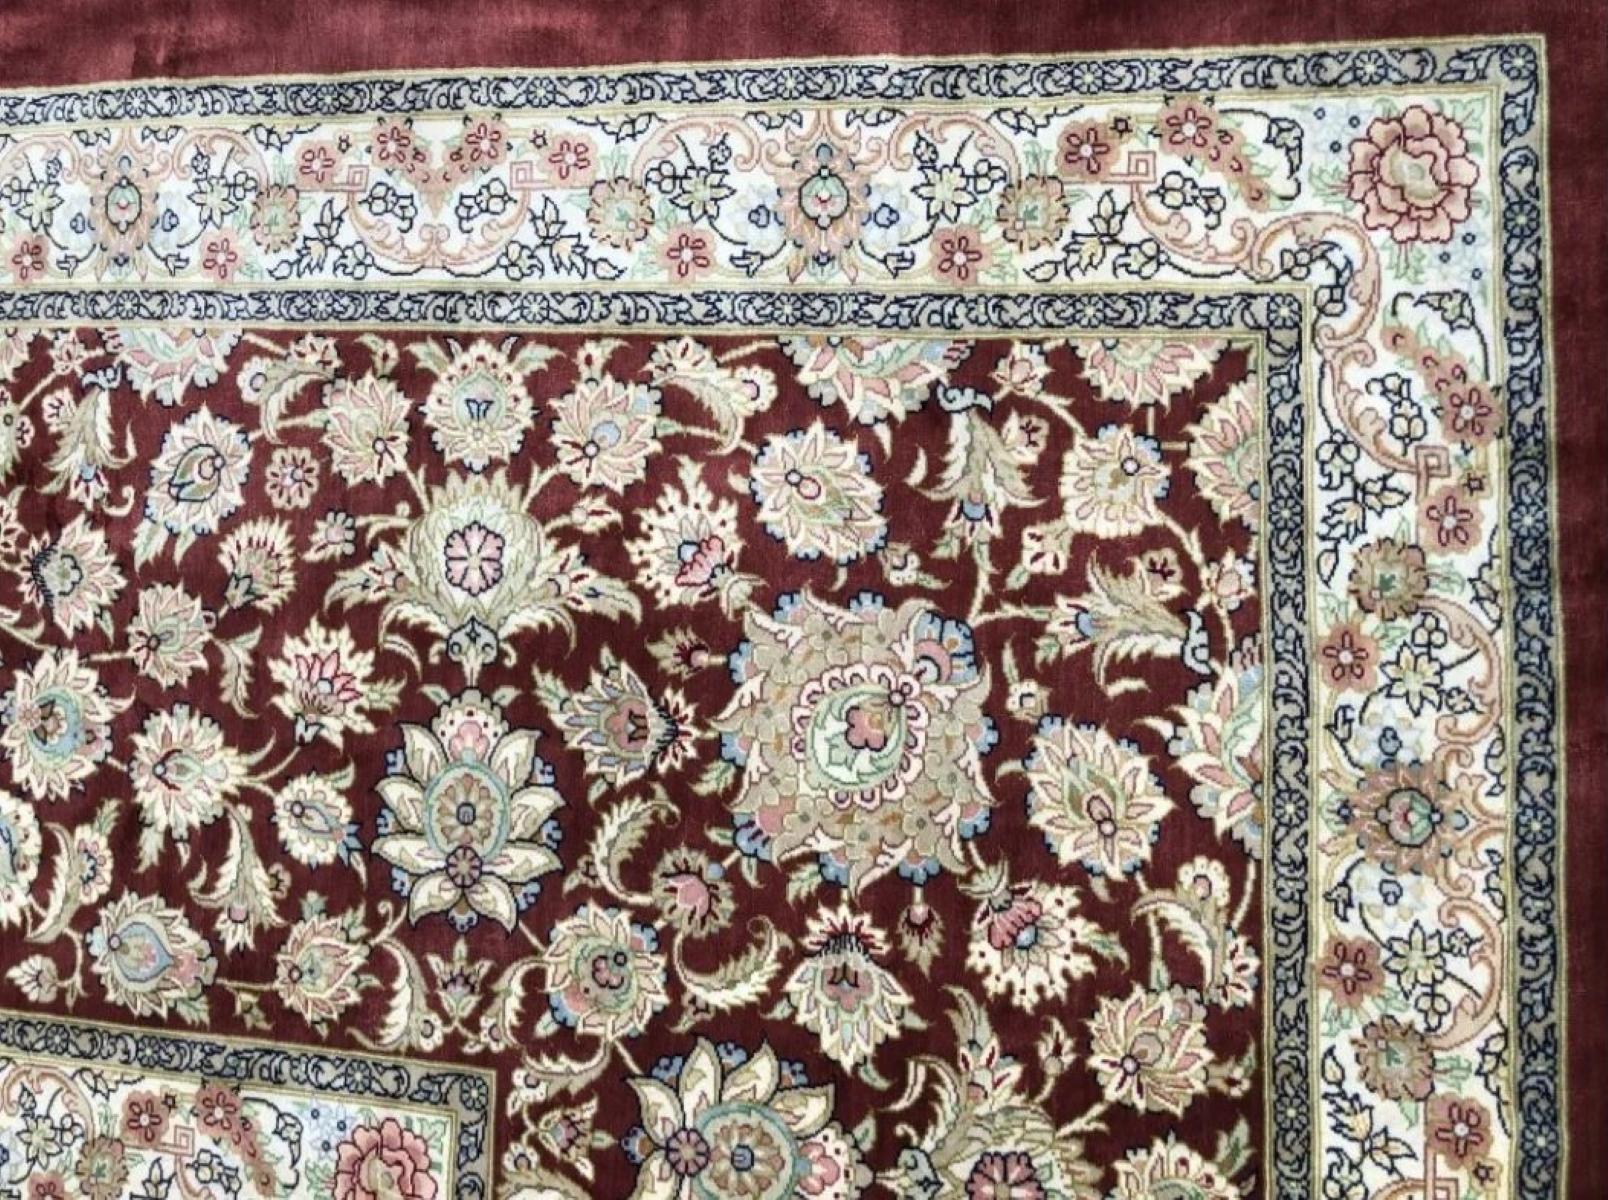 Very Fine Large Persian Silk Qum Rug 14.7' x 21.4' For Sale 1